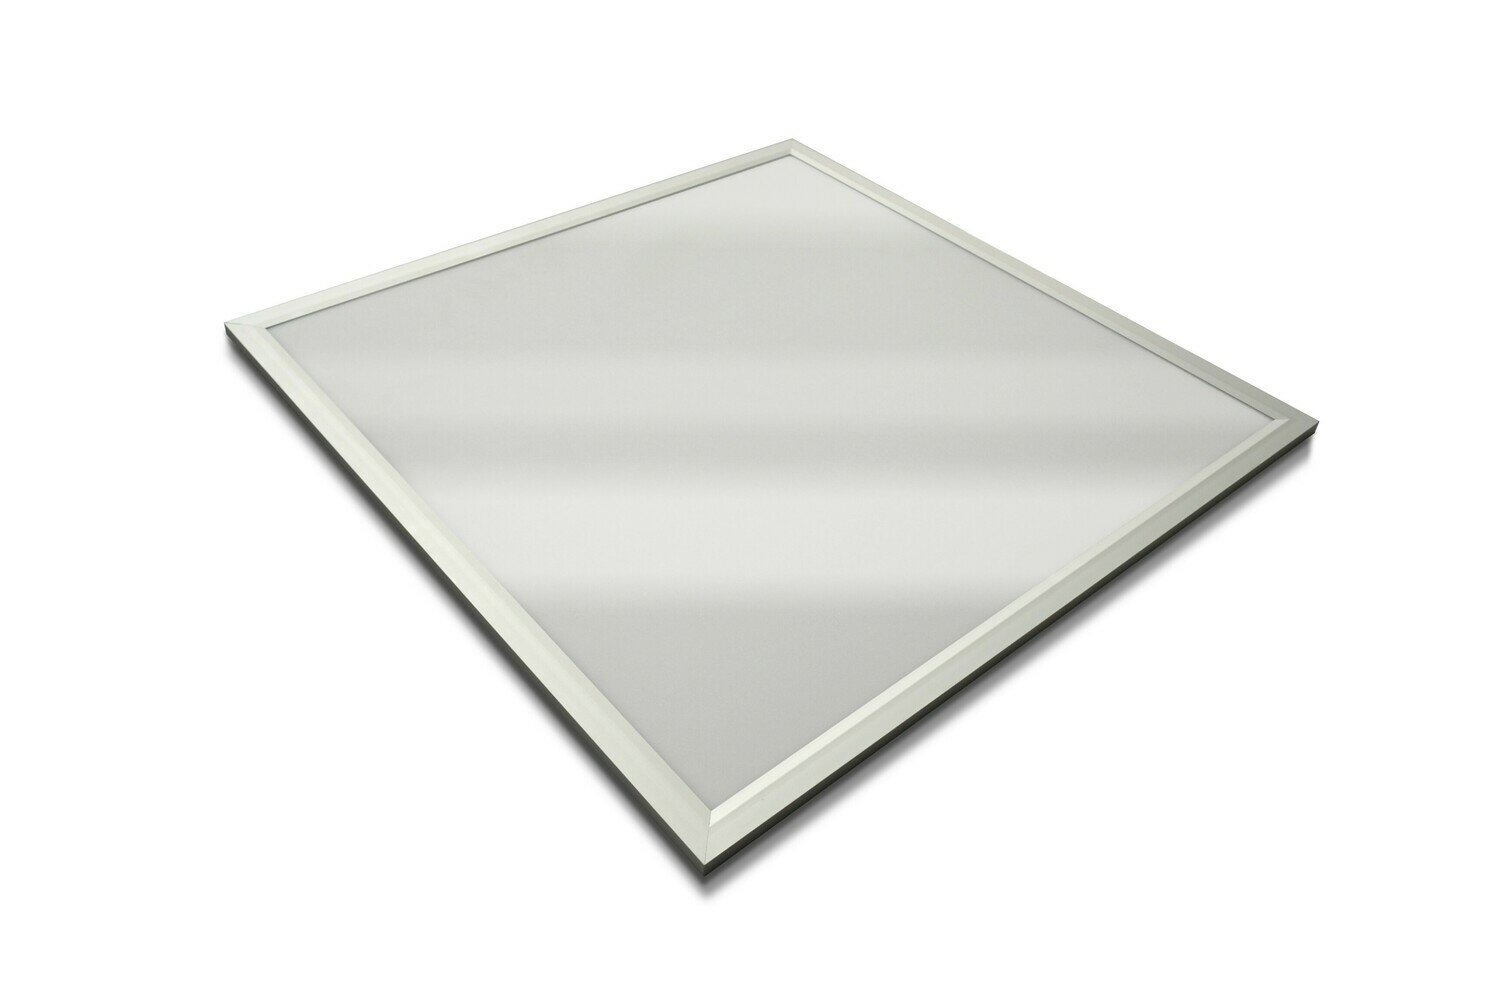 ProLuce® LED Panel PIAZZA SP 595x595x10 mm 48W, 3000K, 4320 lm, 110°, IP20, weiss, 0-10V dimmbar